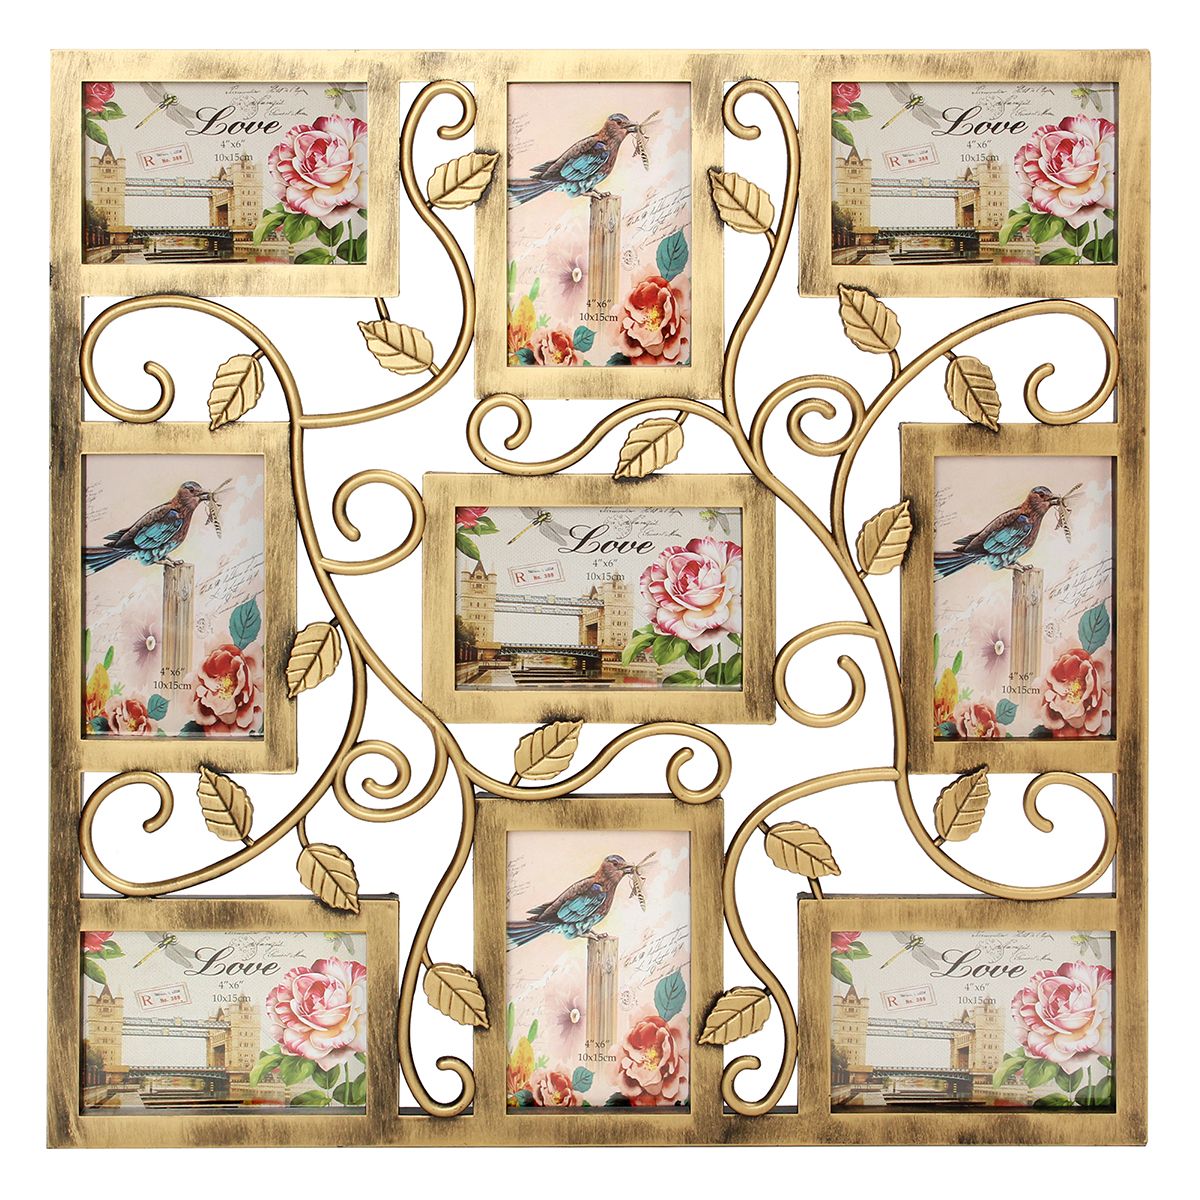 Bronze-Floral-Wall-Hanging-Collage-Photo-Frames-Picture-Display-Decor-Gift-6X4inch-1237802